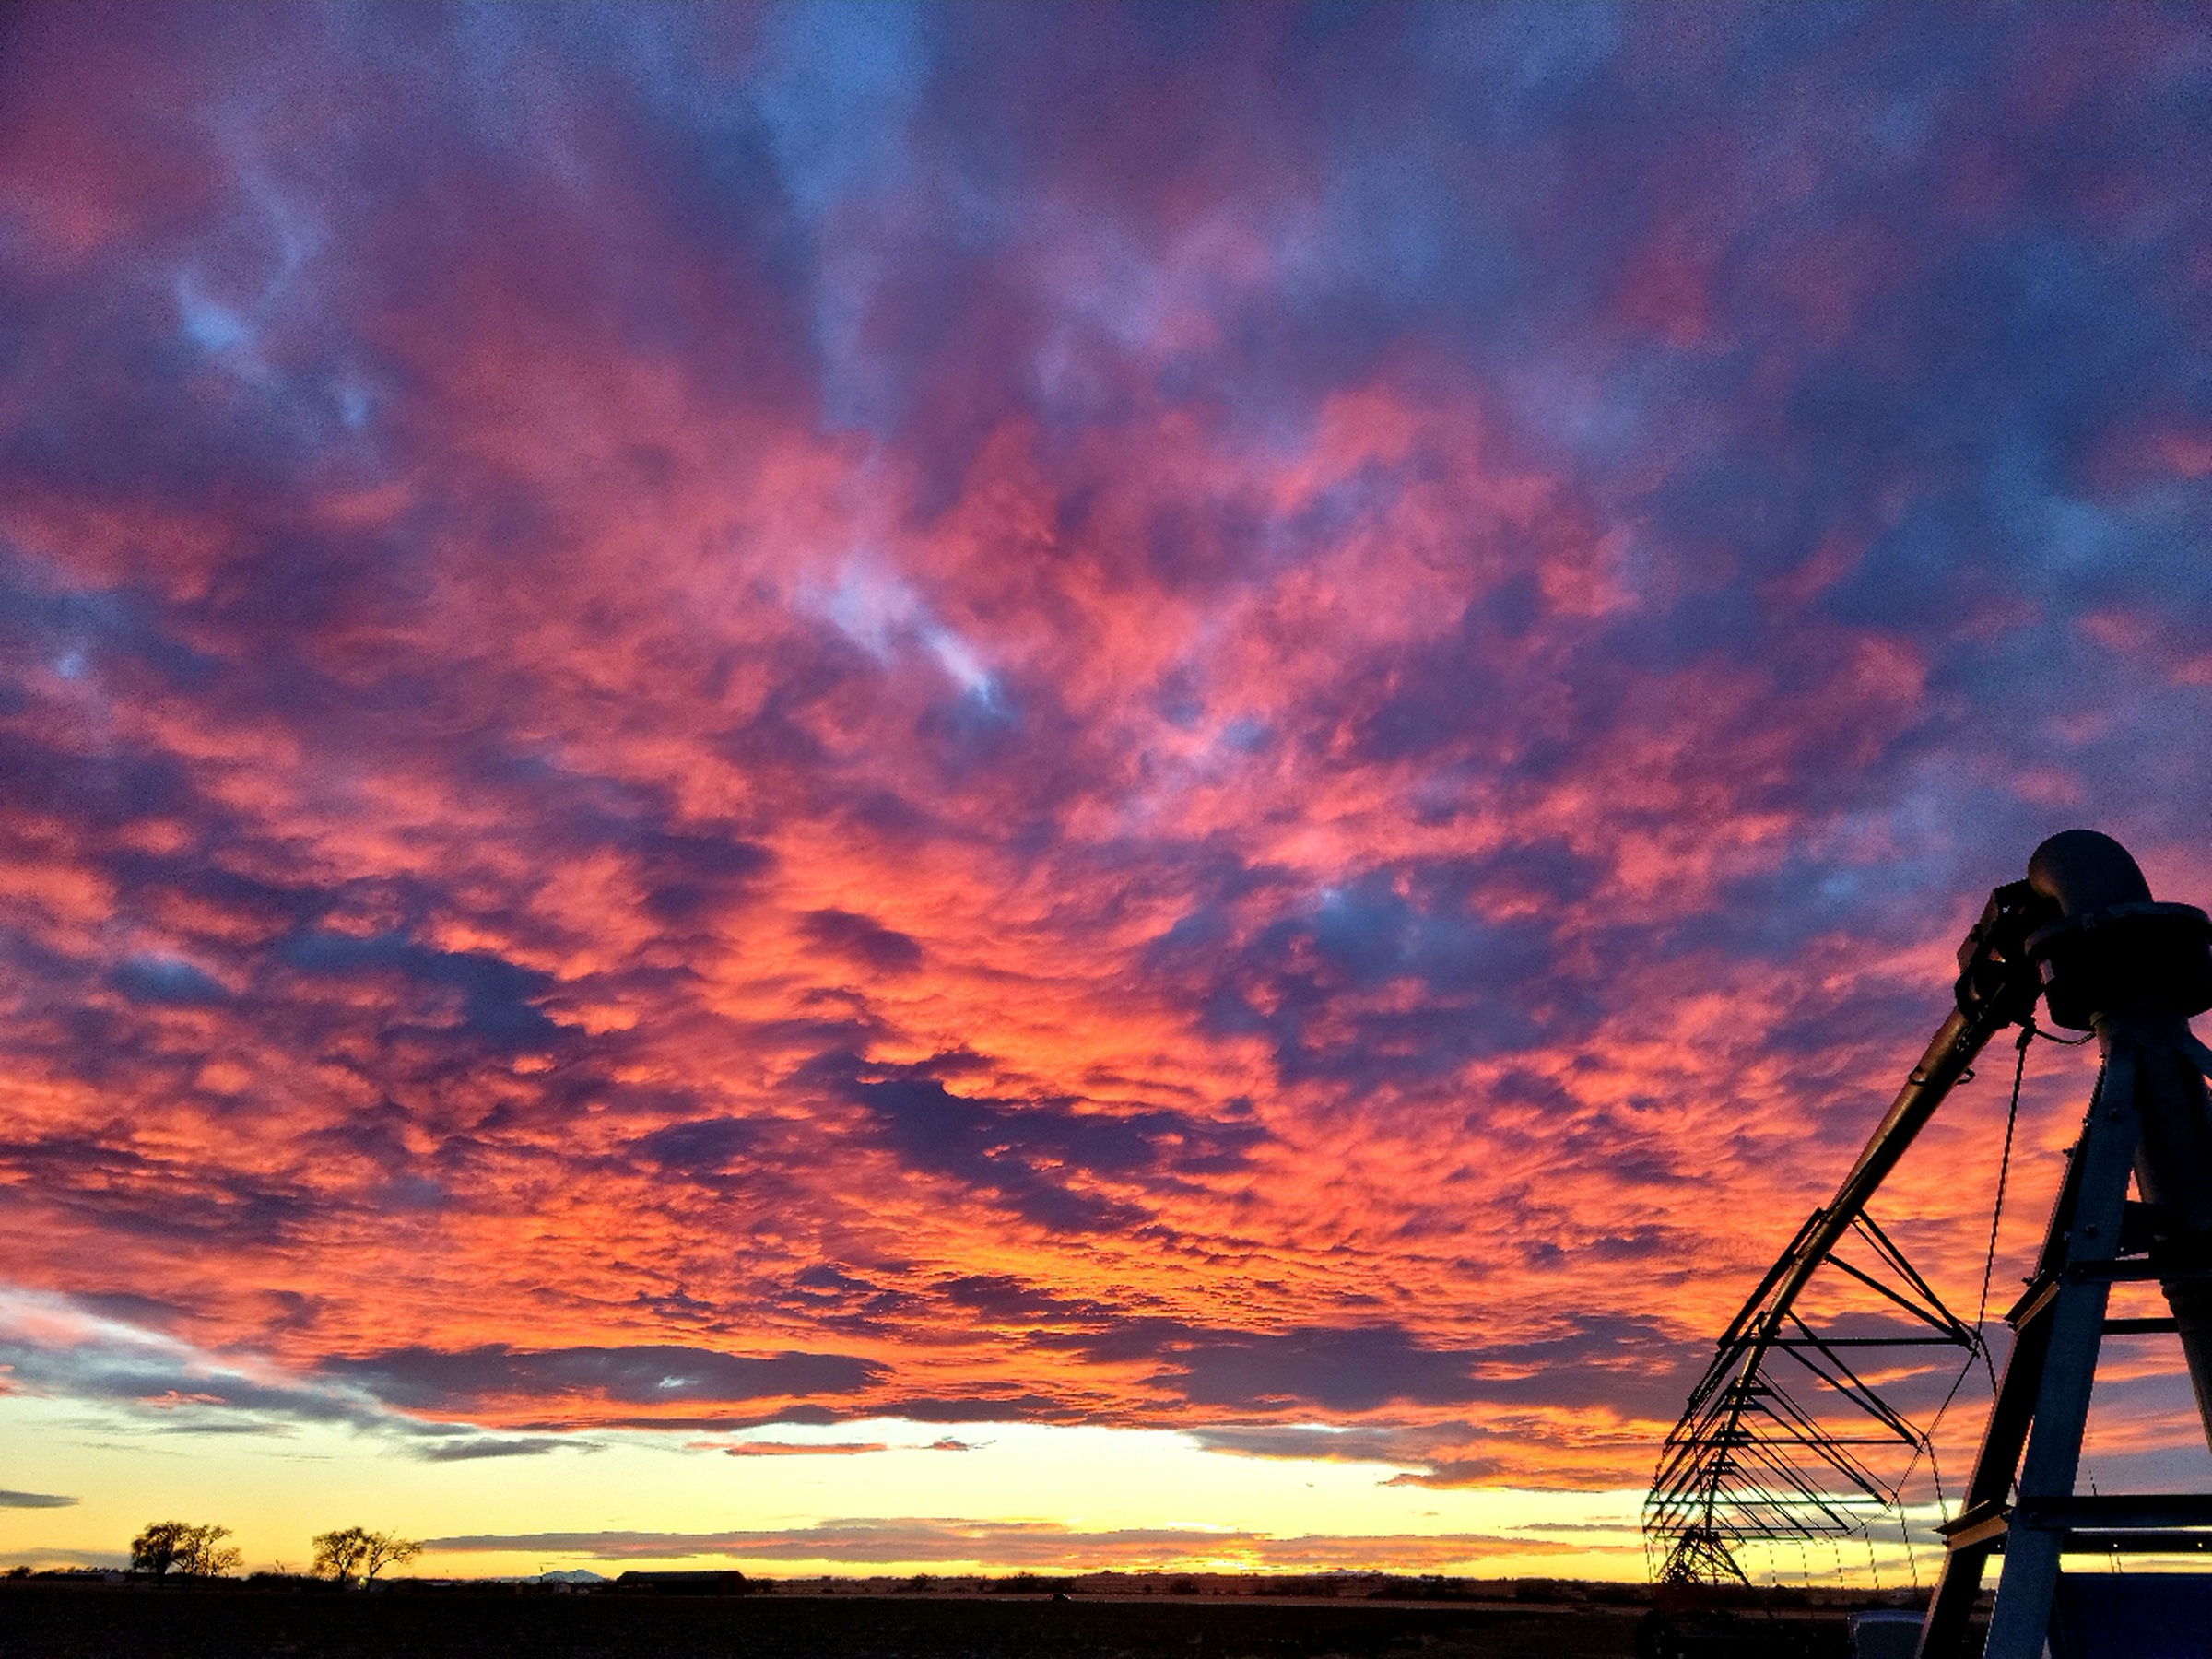 Southeast Colorado Sunset Photo Gallery by Adrian Hart SECO News seconews.org